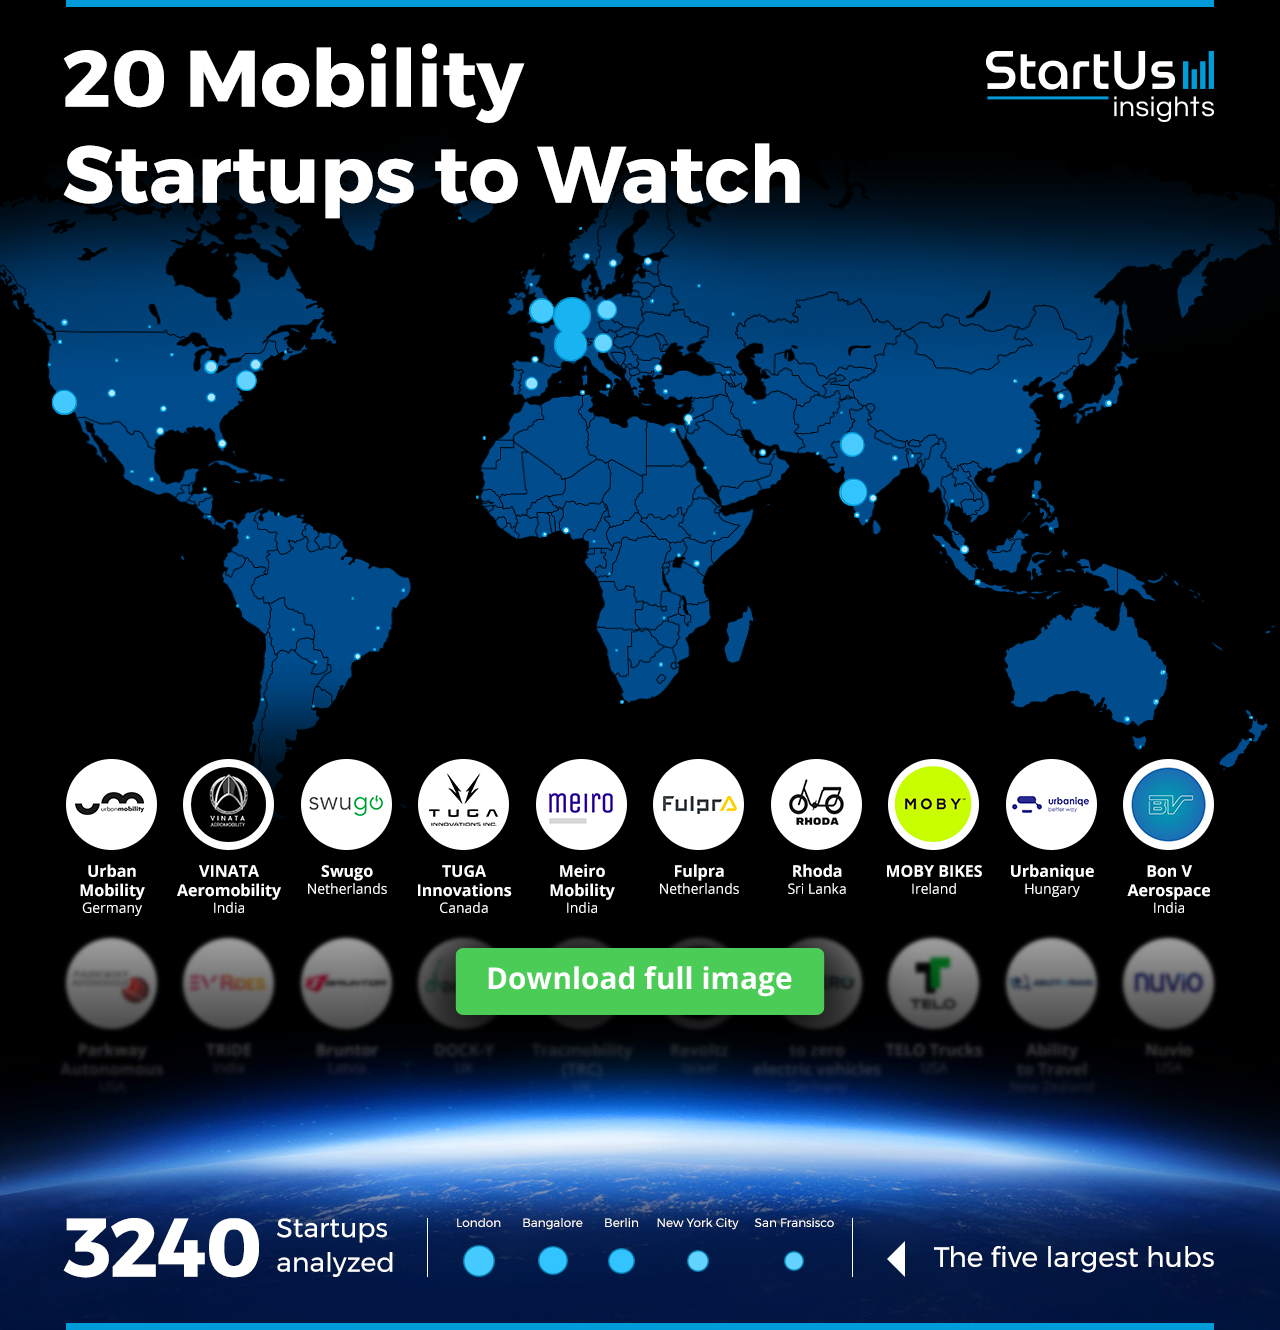 Mobility-Startups-to-Watch-Heat-Map-Blurred-StartUs-Insights-noresize